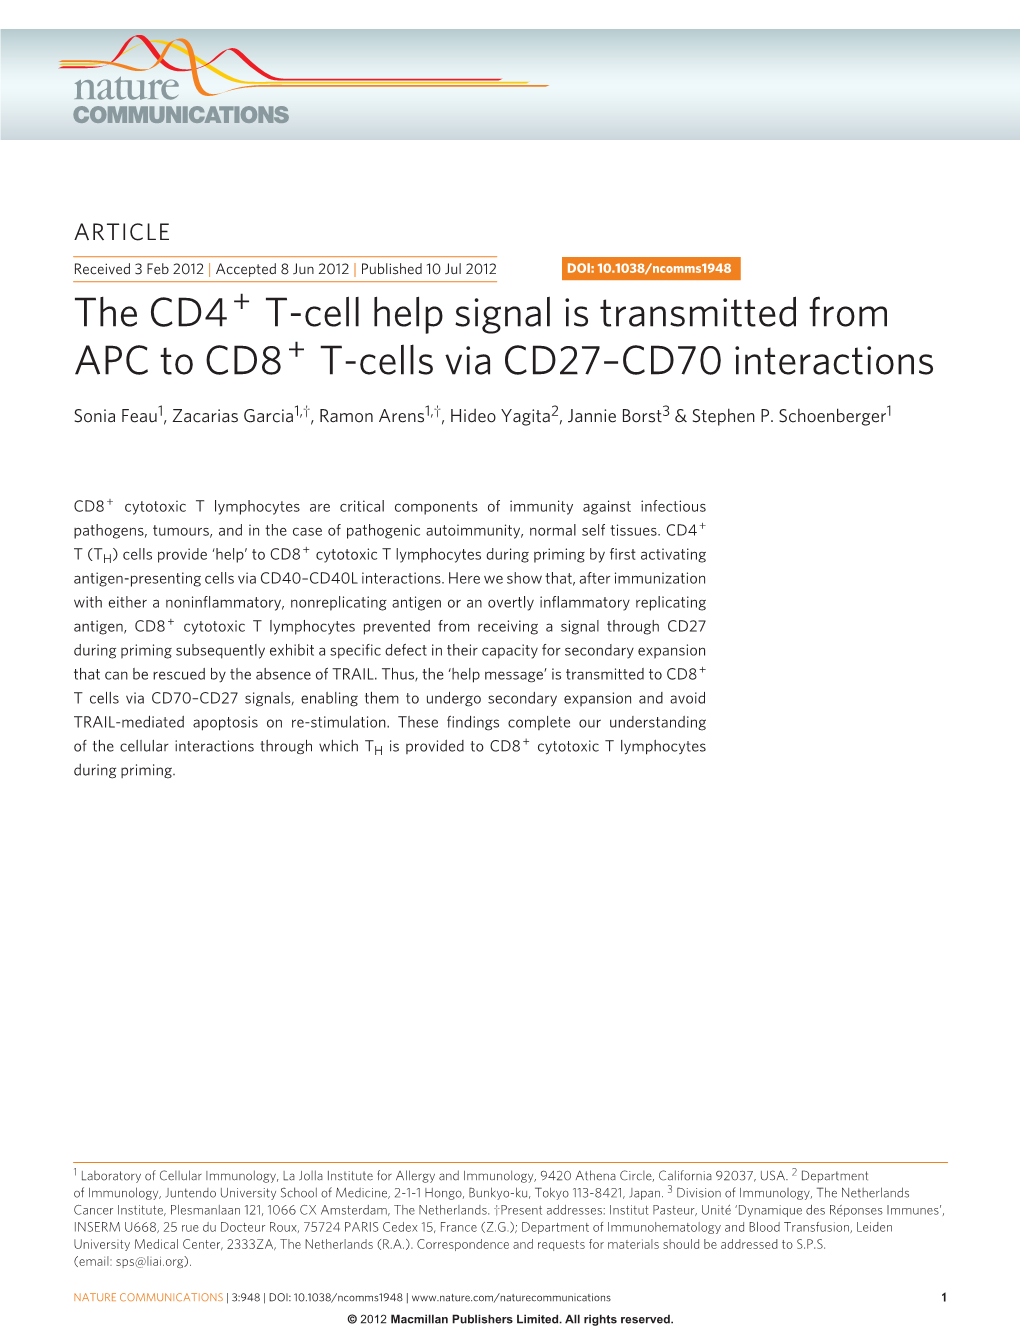 The CD4+ T-Cell Help Signal Is Transmitted from APC to CD8+ T